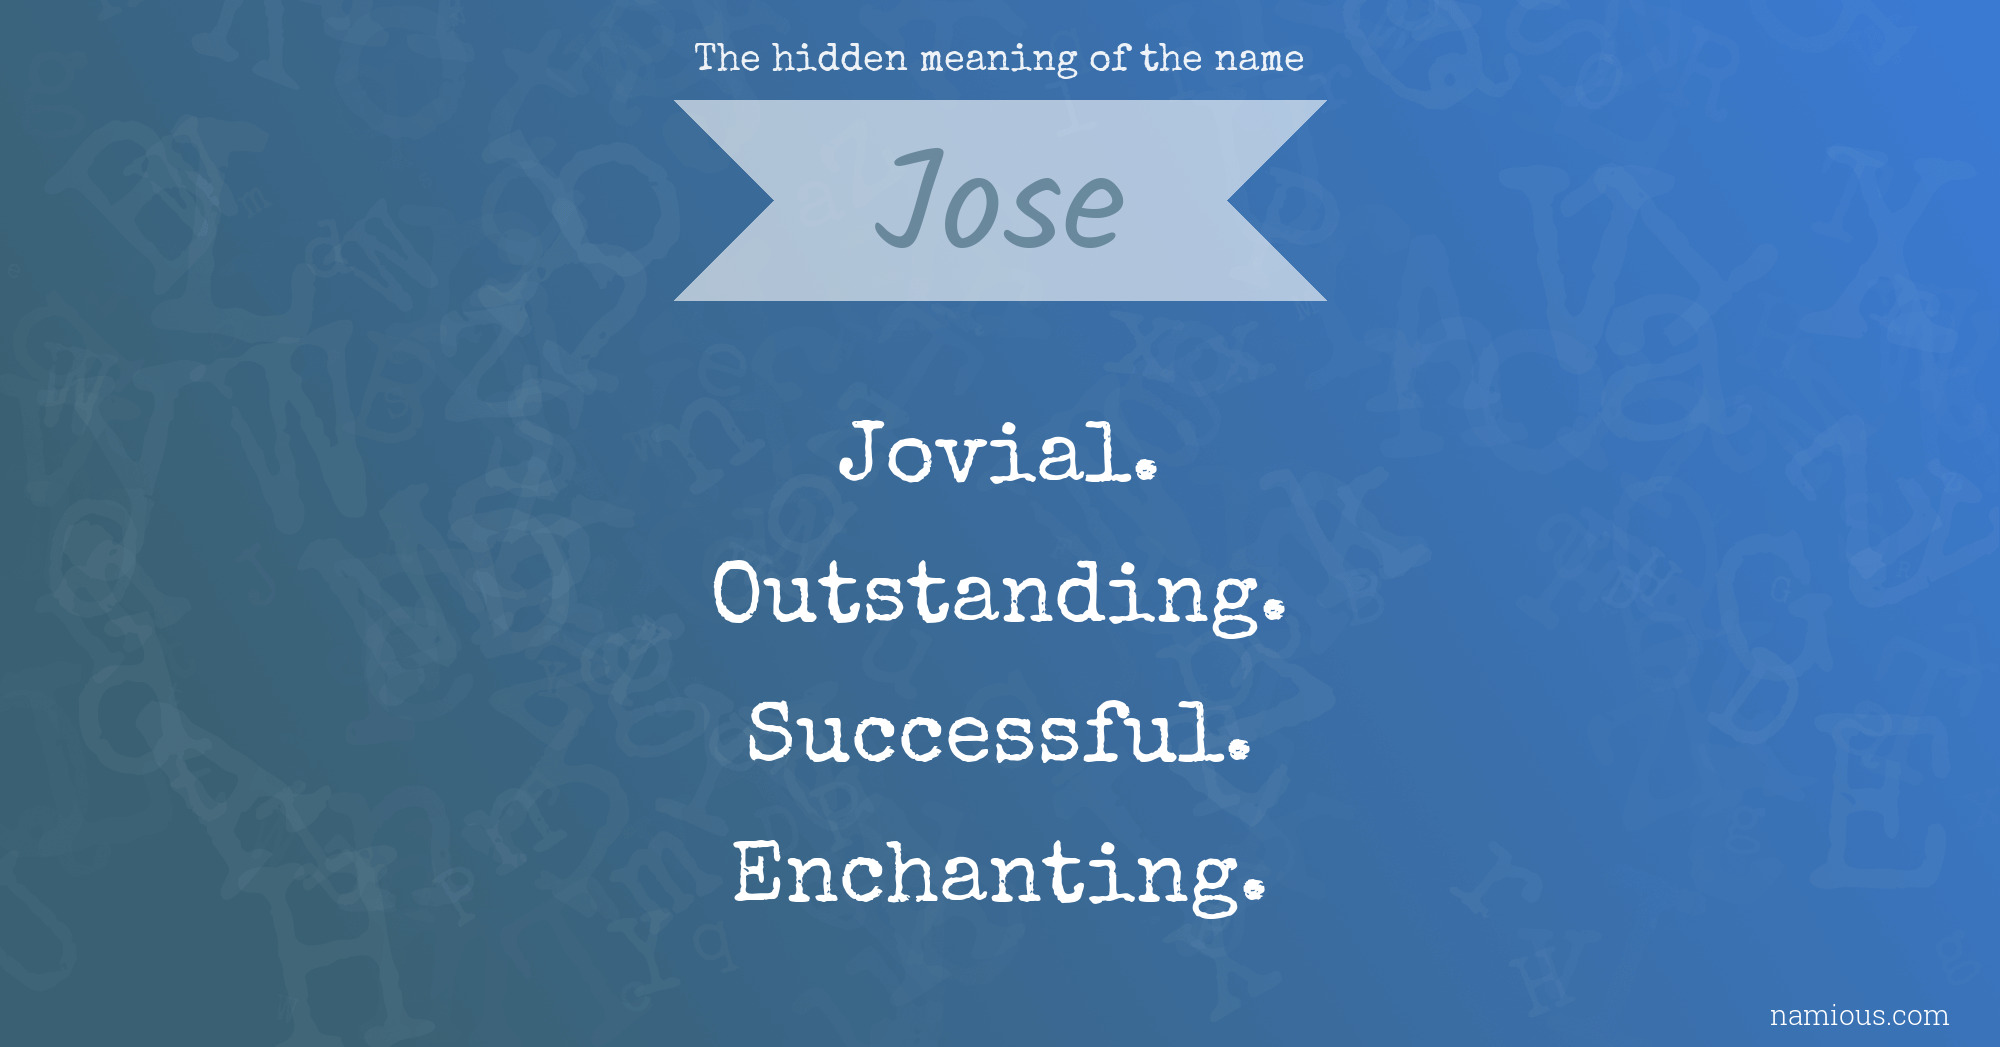 The hidden meaning of the name Jose